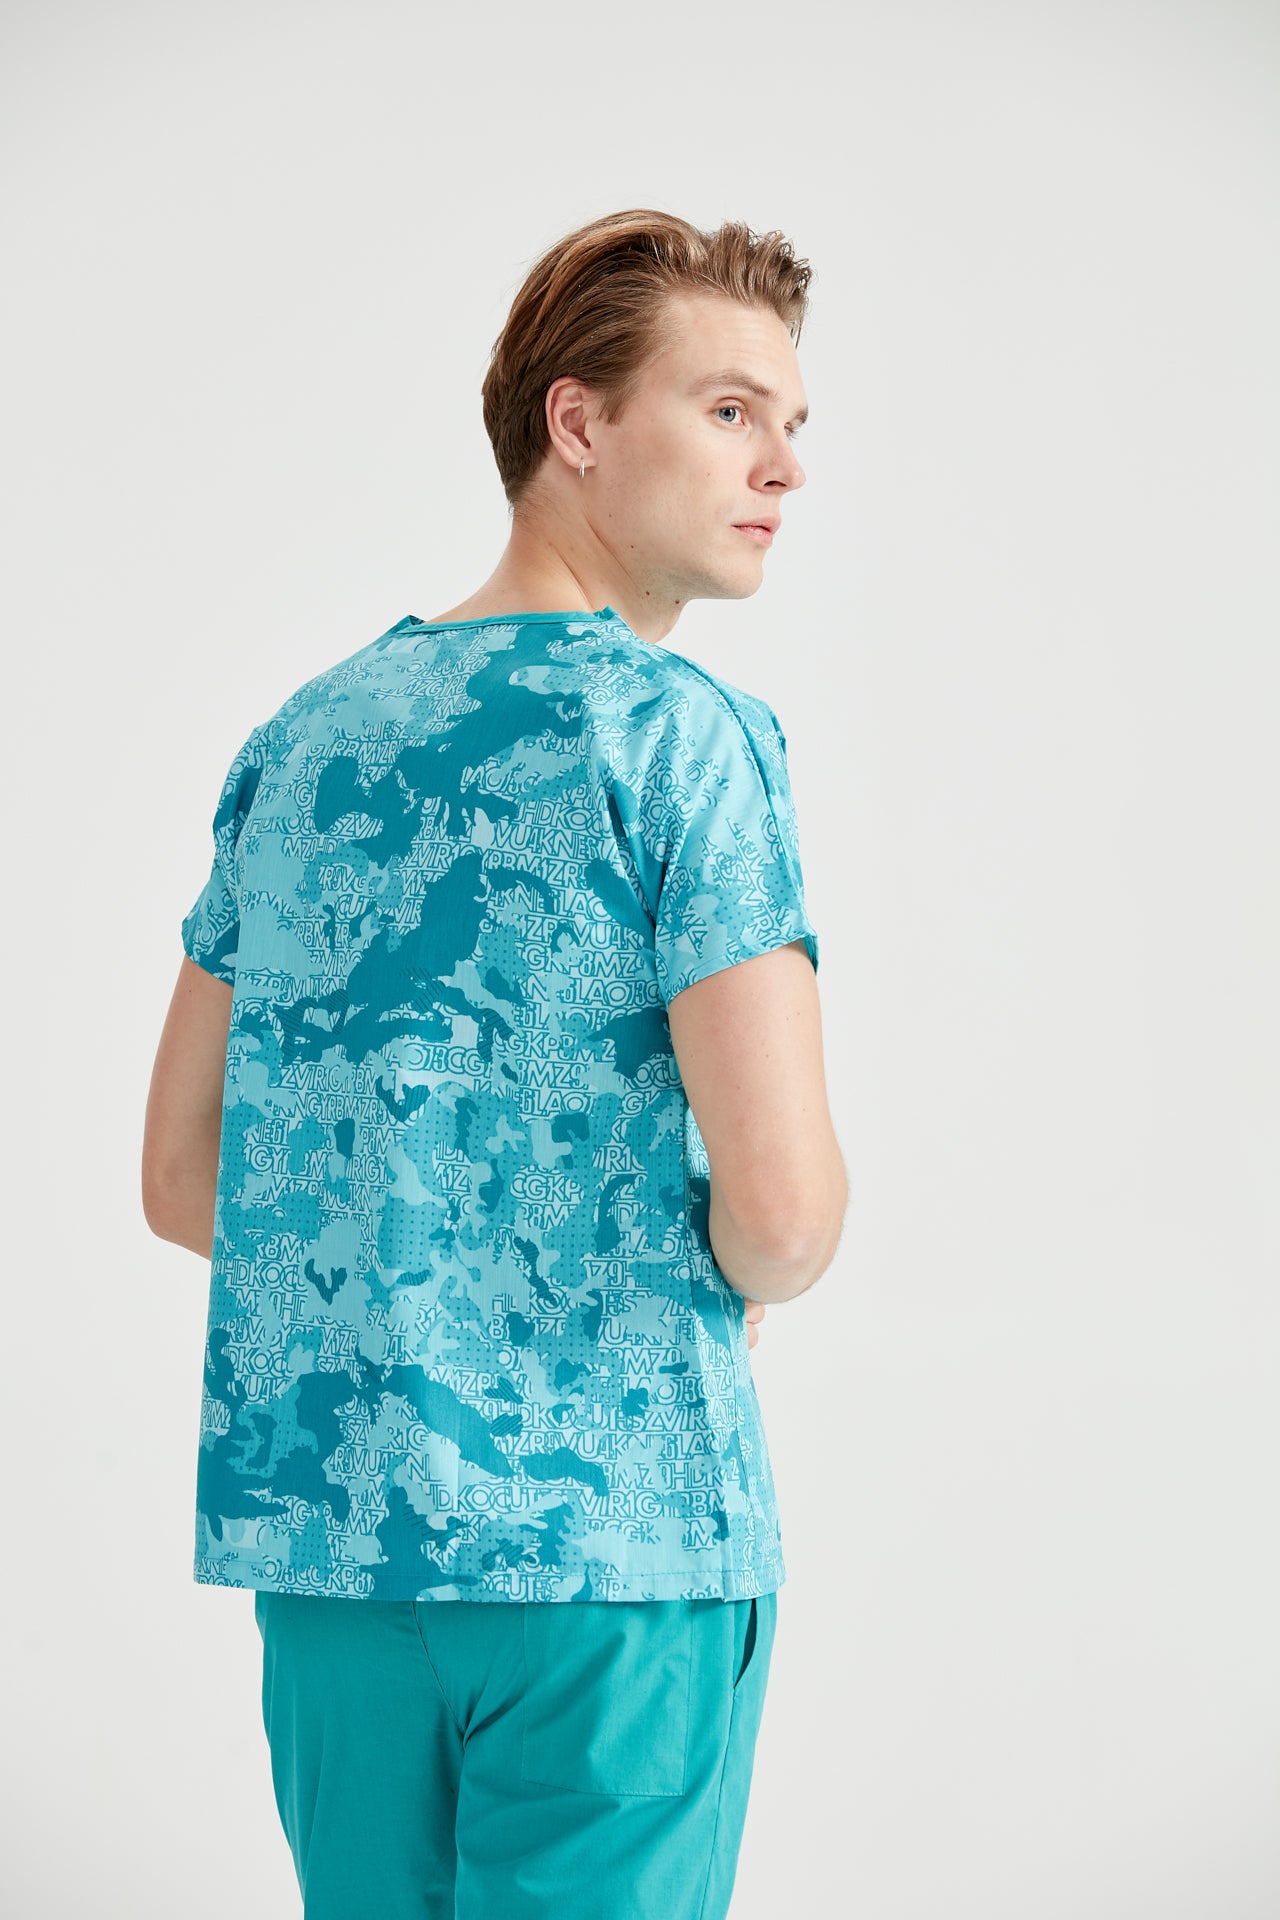 Asistent medical imbracat in bluza Turquoise Camouflage, vedere din spate  